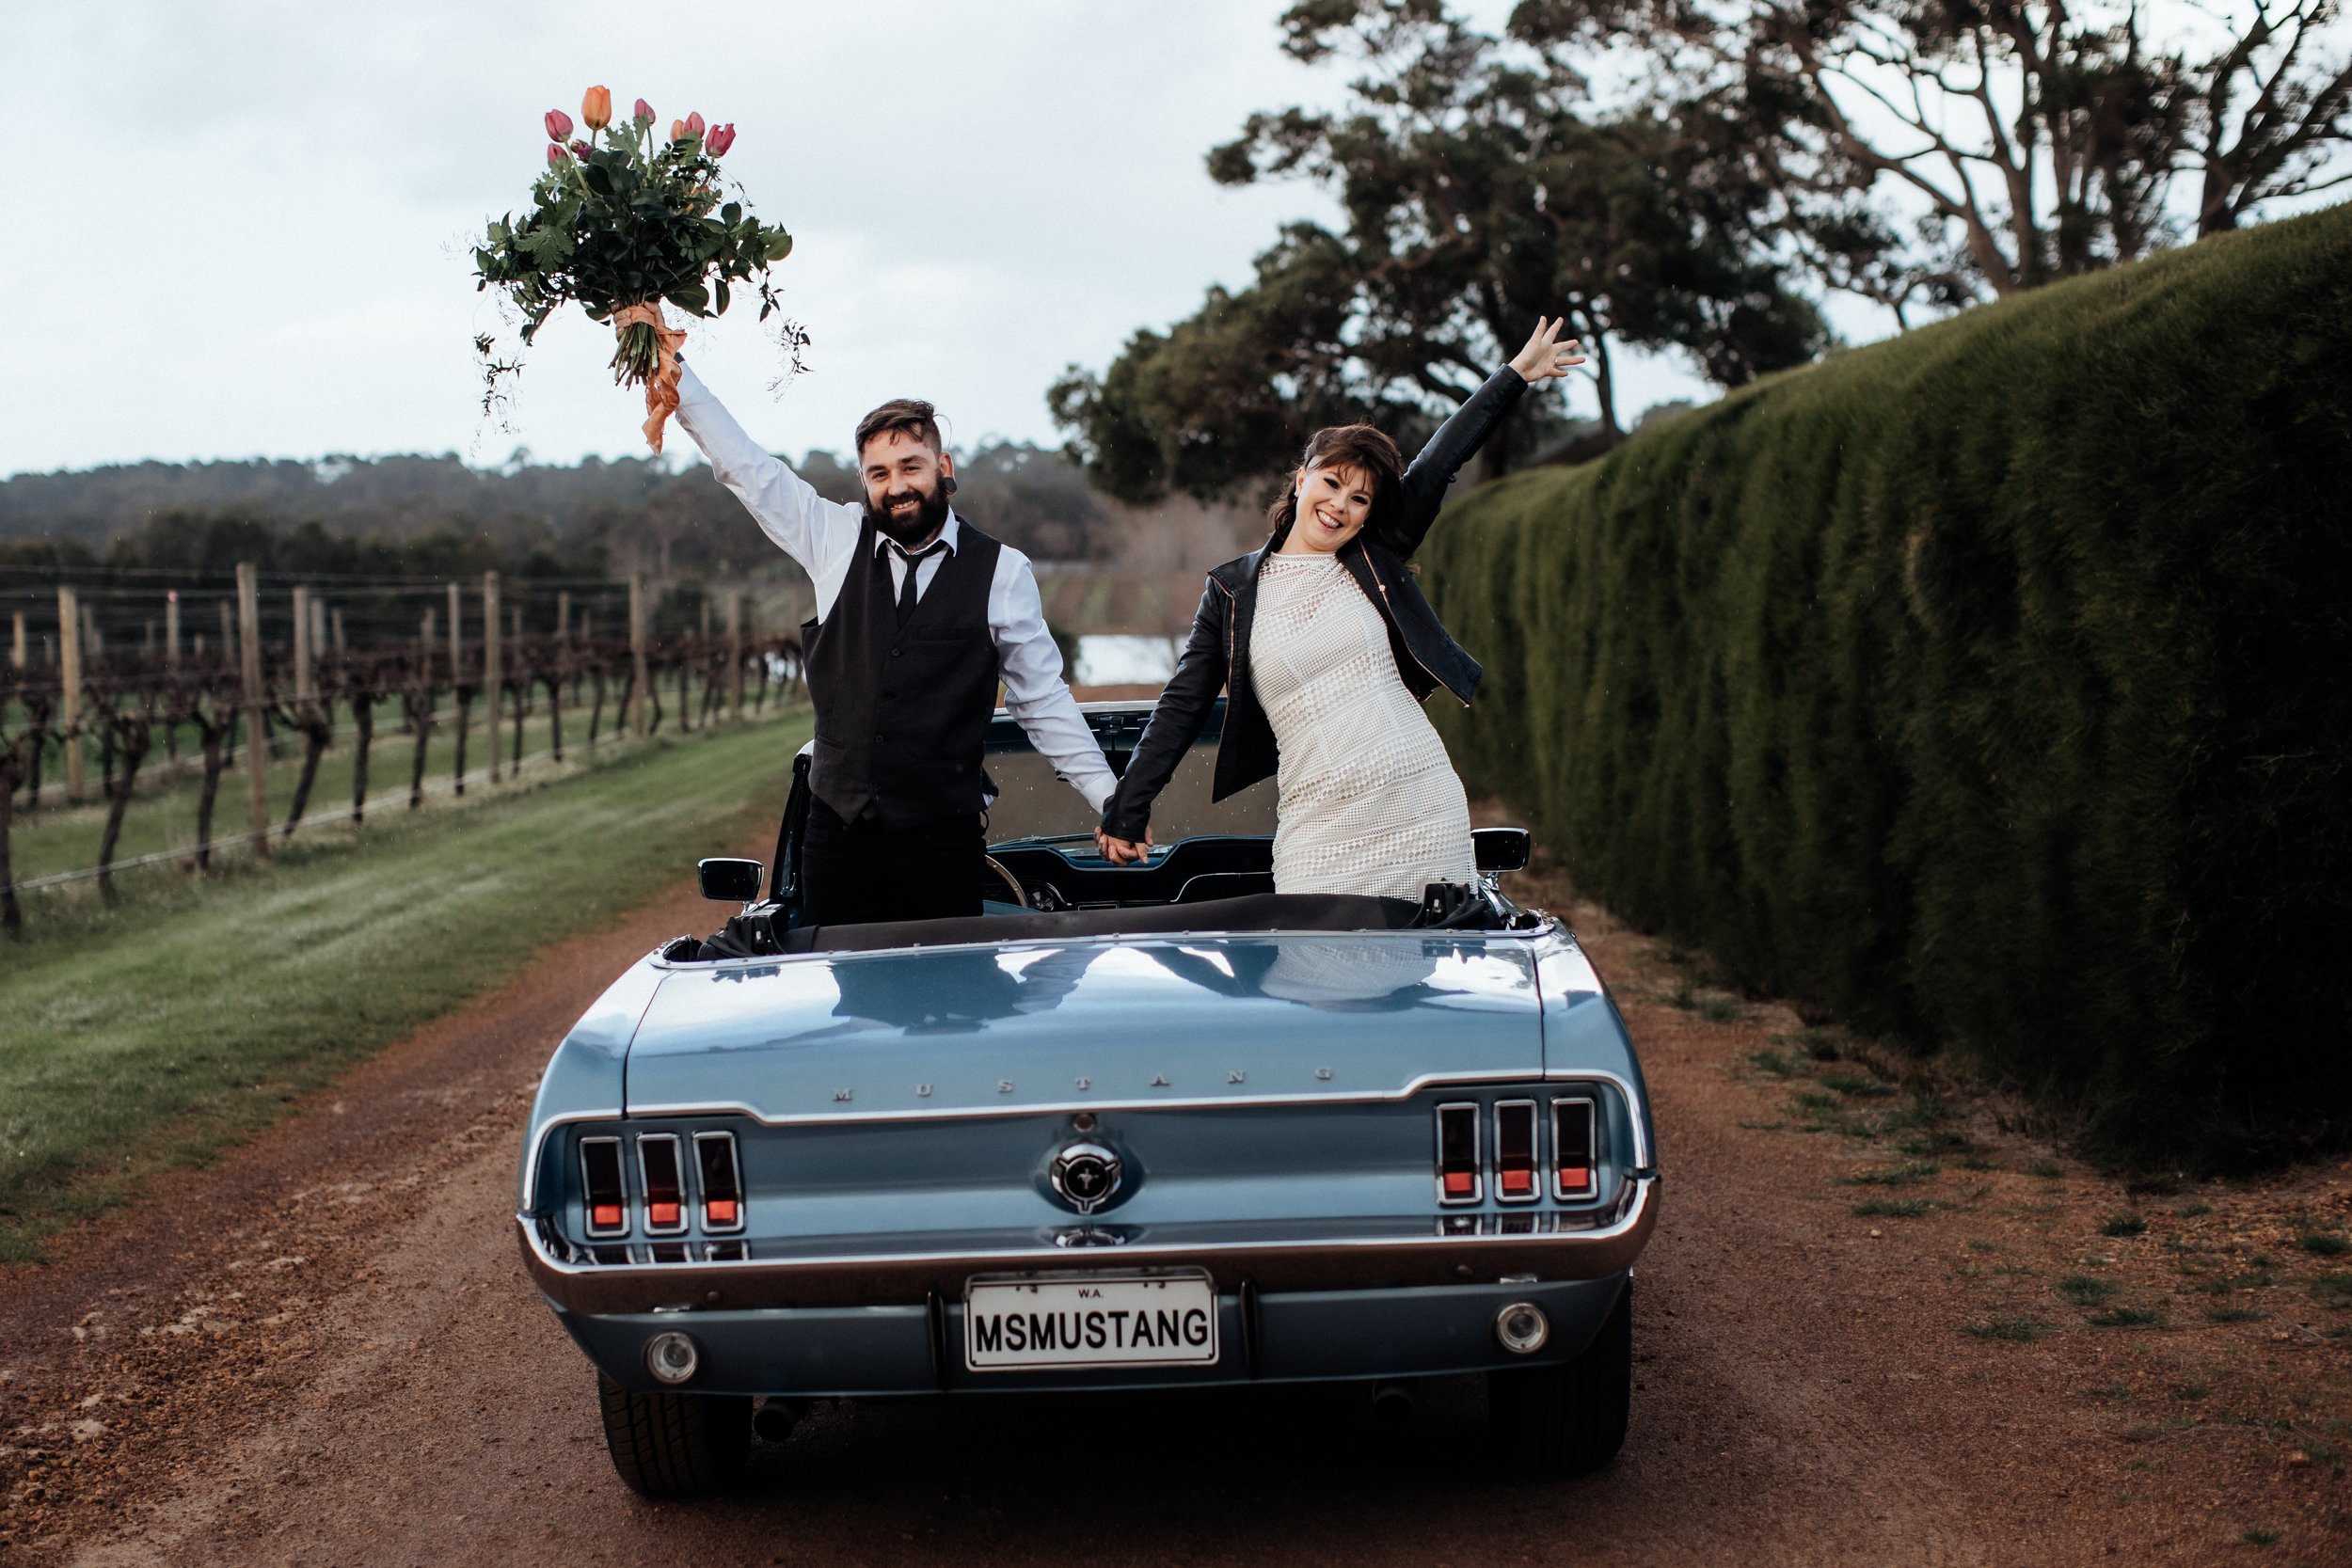 styled elopement shoot-victoria baker-mr mustang hire-classic car hire-margaret river-photography-south west16.jpg